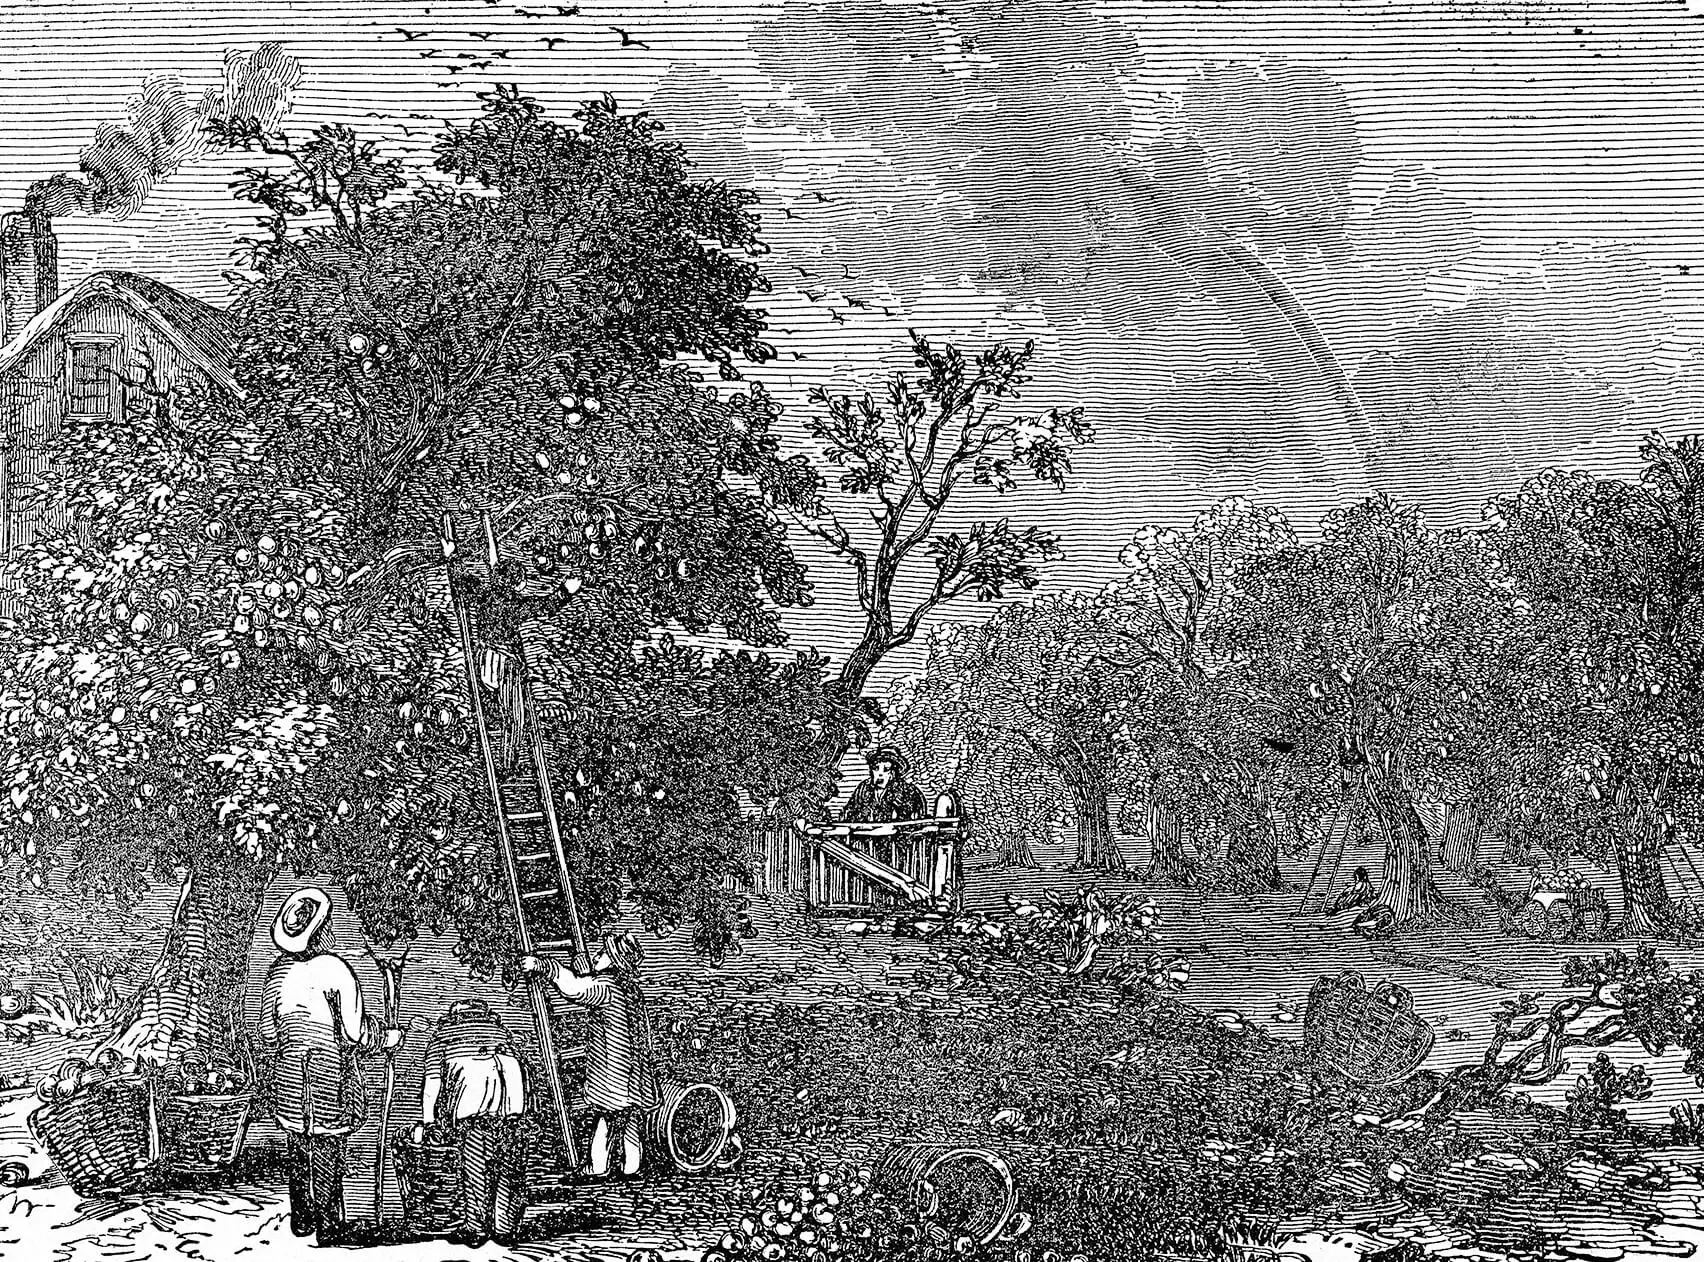 Black and white illustration of a tree orchard, with a group of men picking fruit on ladders.